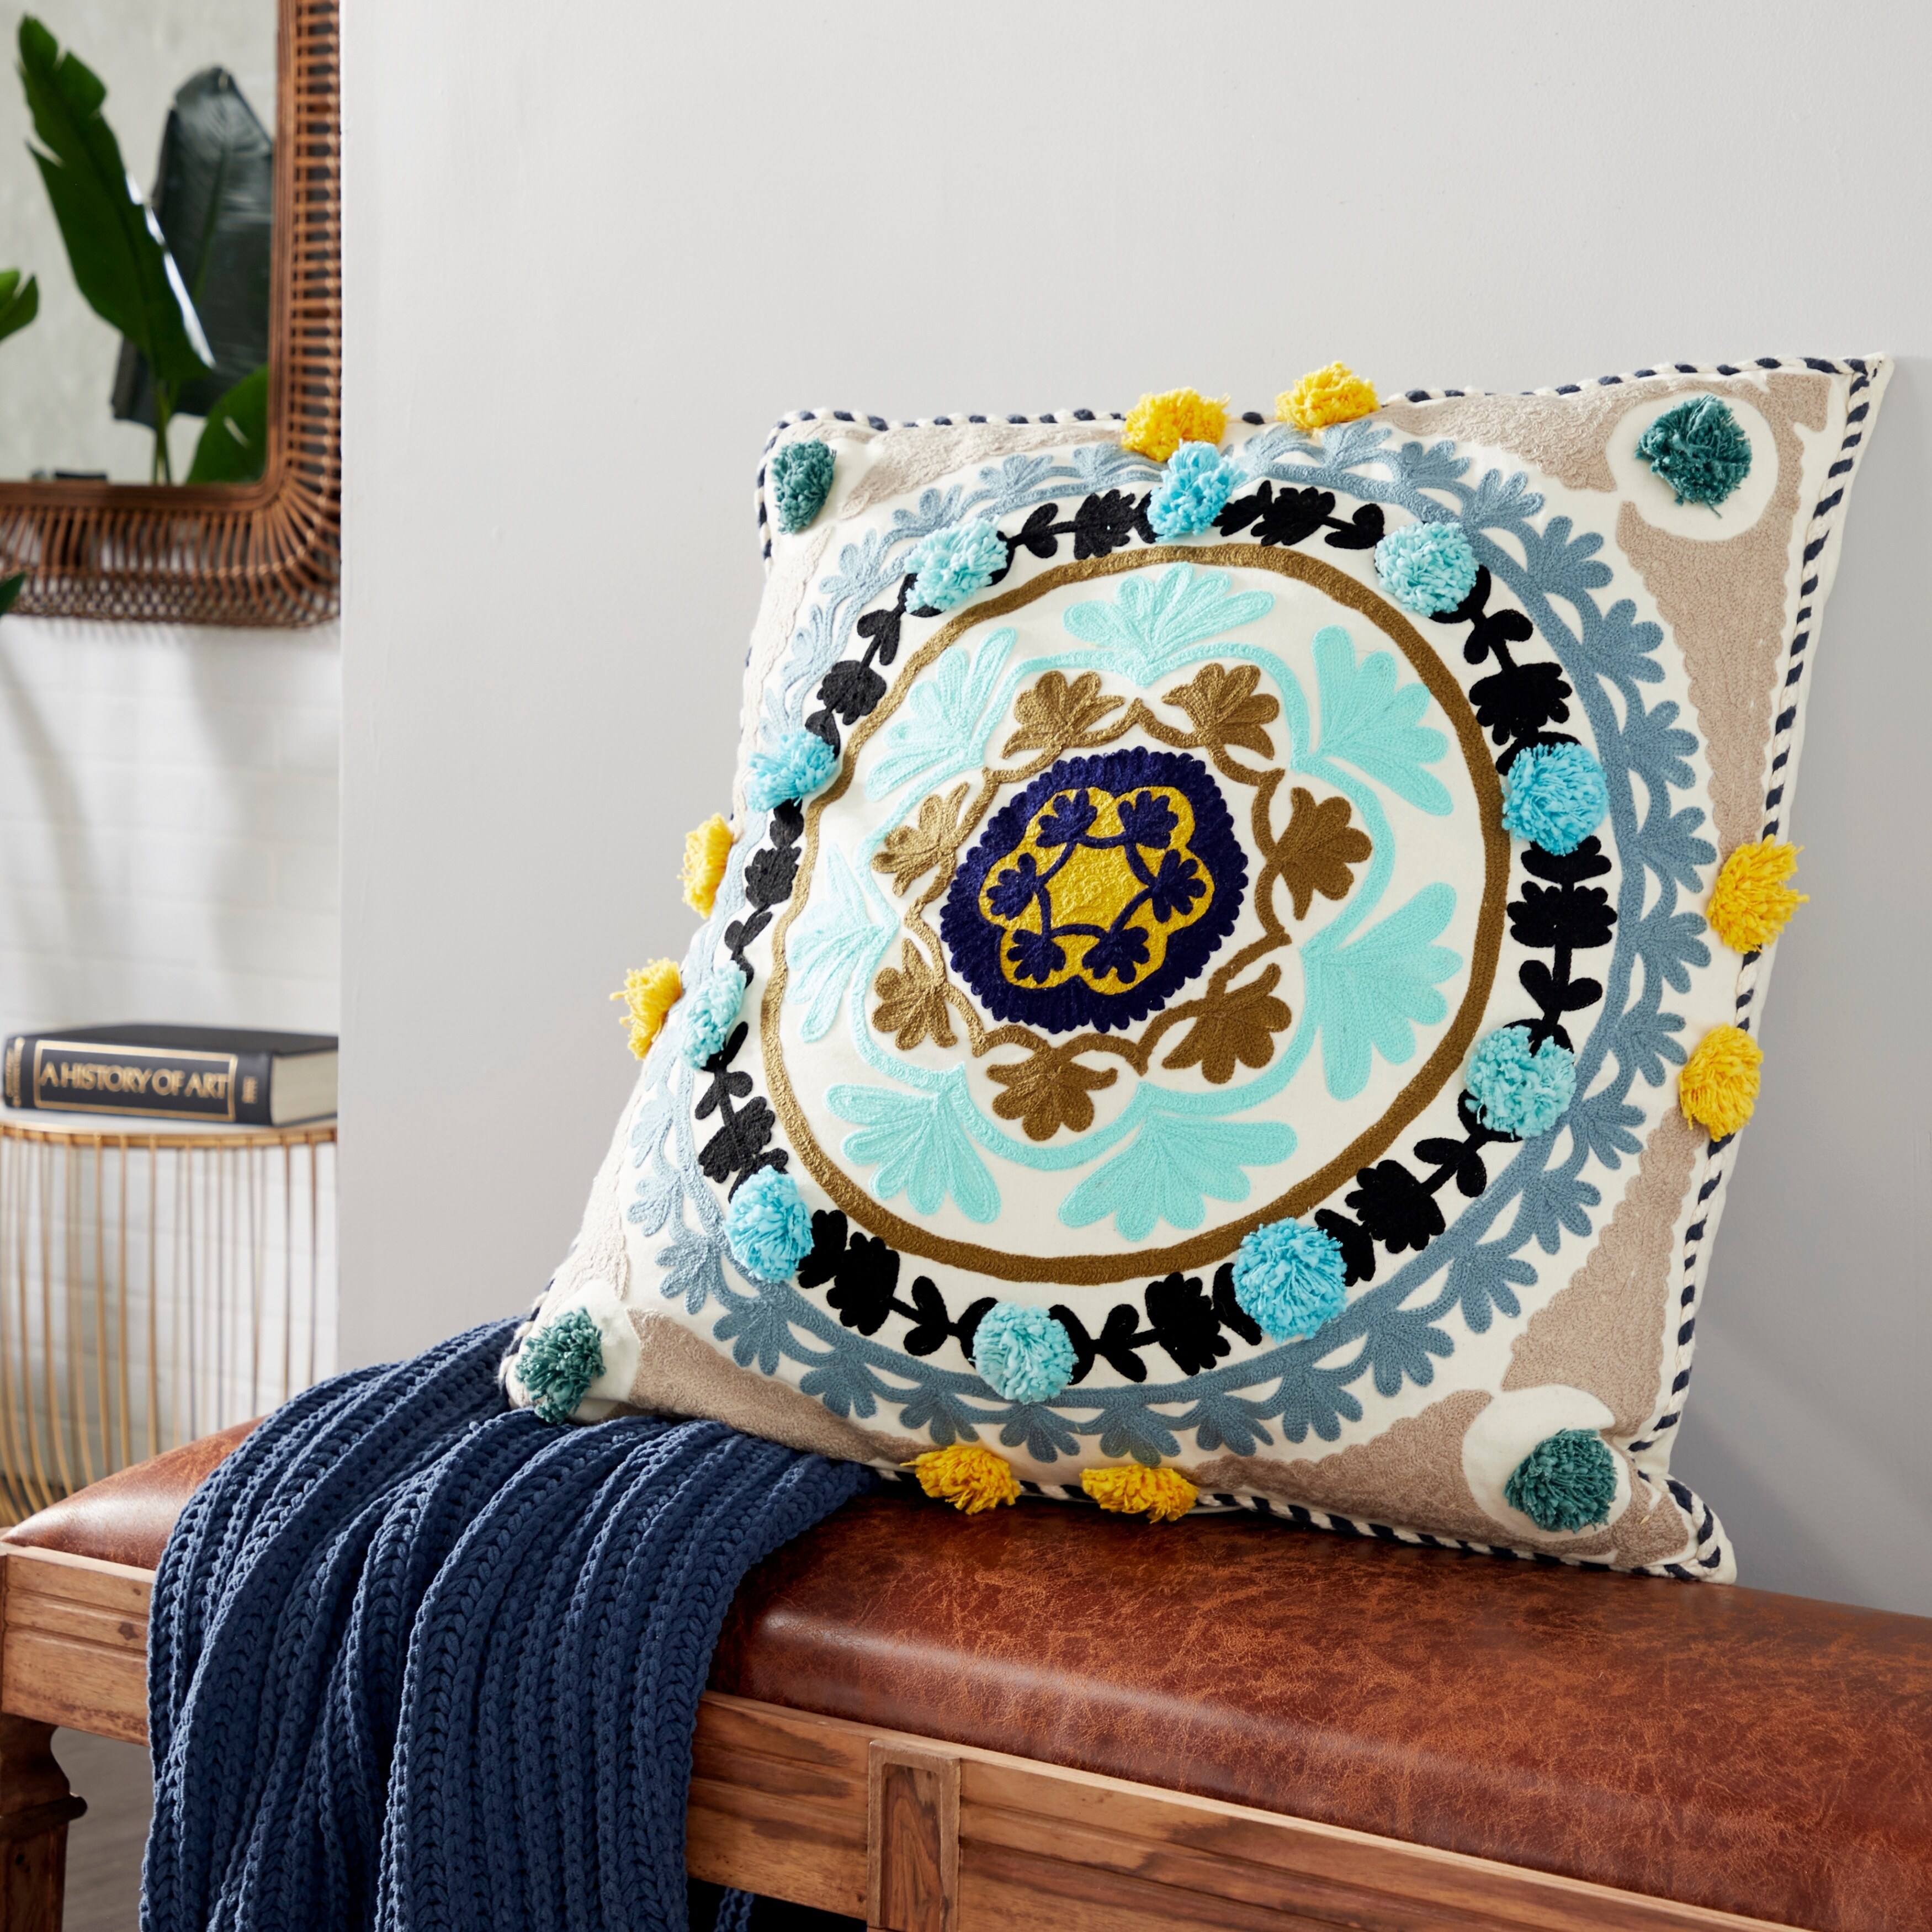 https://ak1.ostkcdn.com/images/products/28251681/Studio-350-Eclectic-Mandala-Embroidery-Decorative-28-inch-Throw-Pillow-0df9c005-c9f7-4ce6-a174-bdcf3ccaea97.jpg